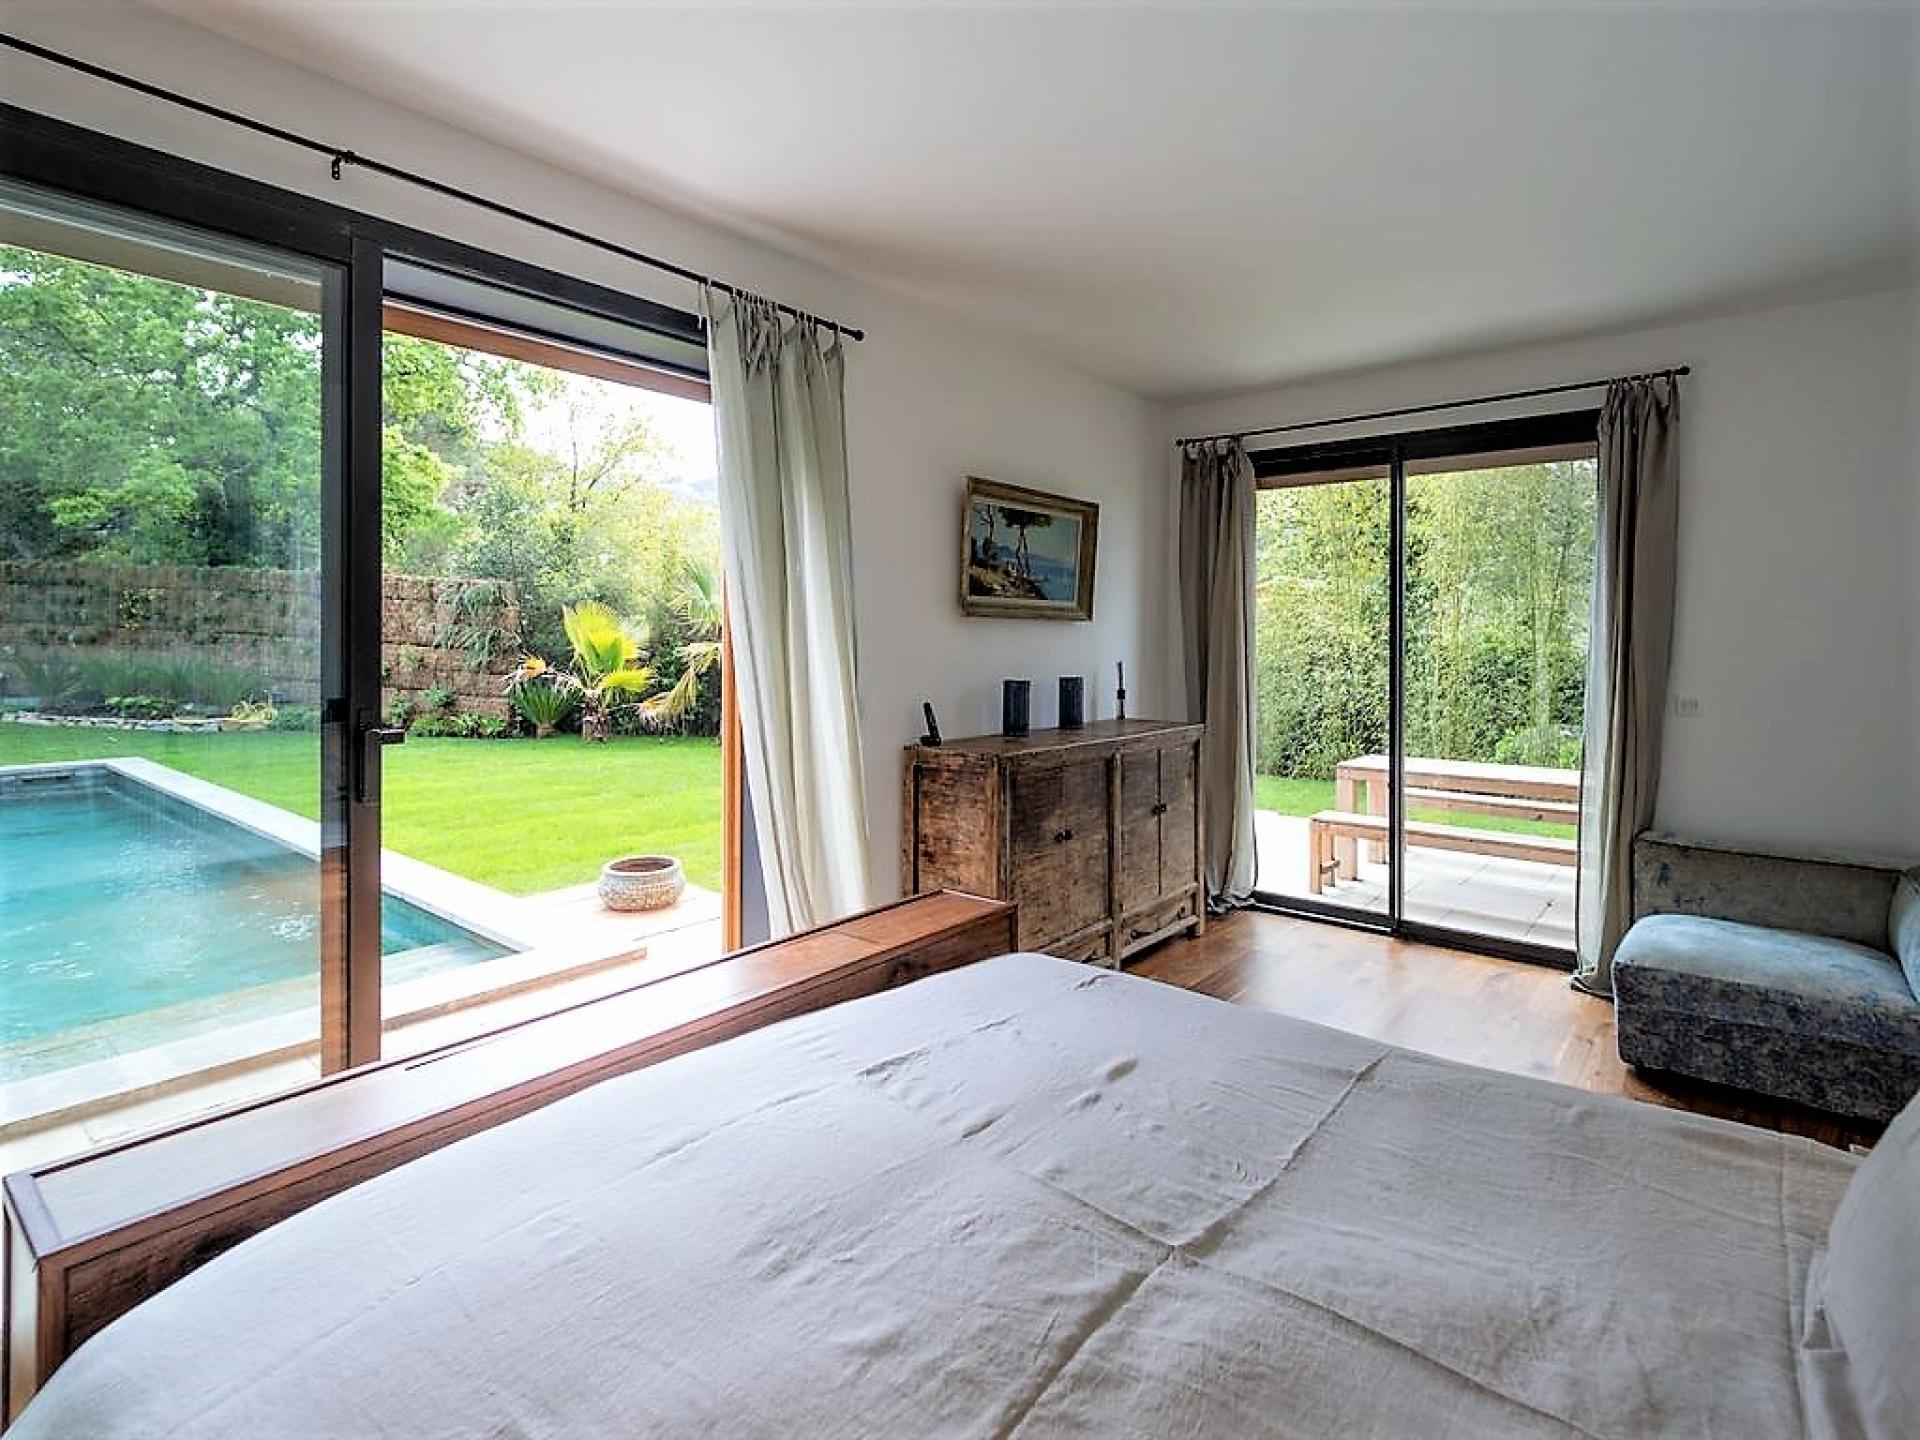 THE BEDROOM WITH VIEW OF THE SWIMMING POOL IN VILLA DE LA PINEDE HOLIDAY RENTAL IN ST TROPEZ